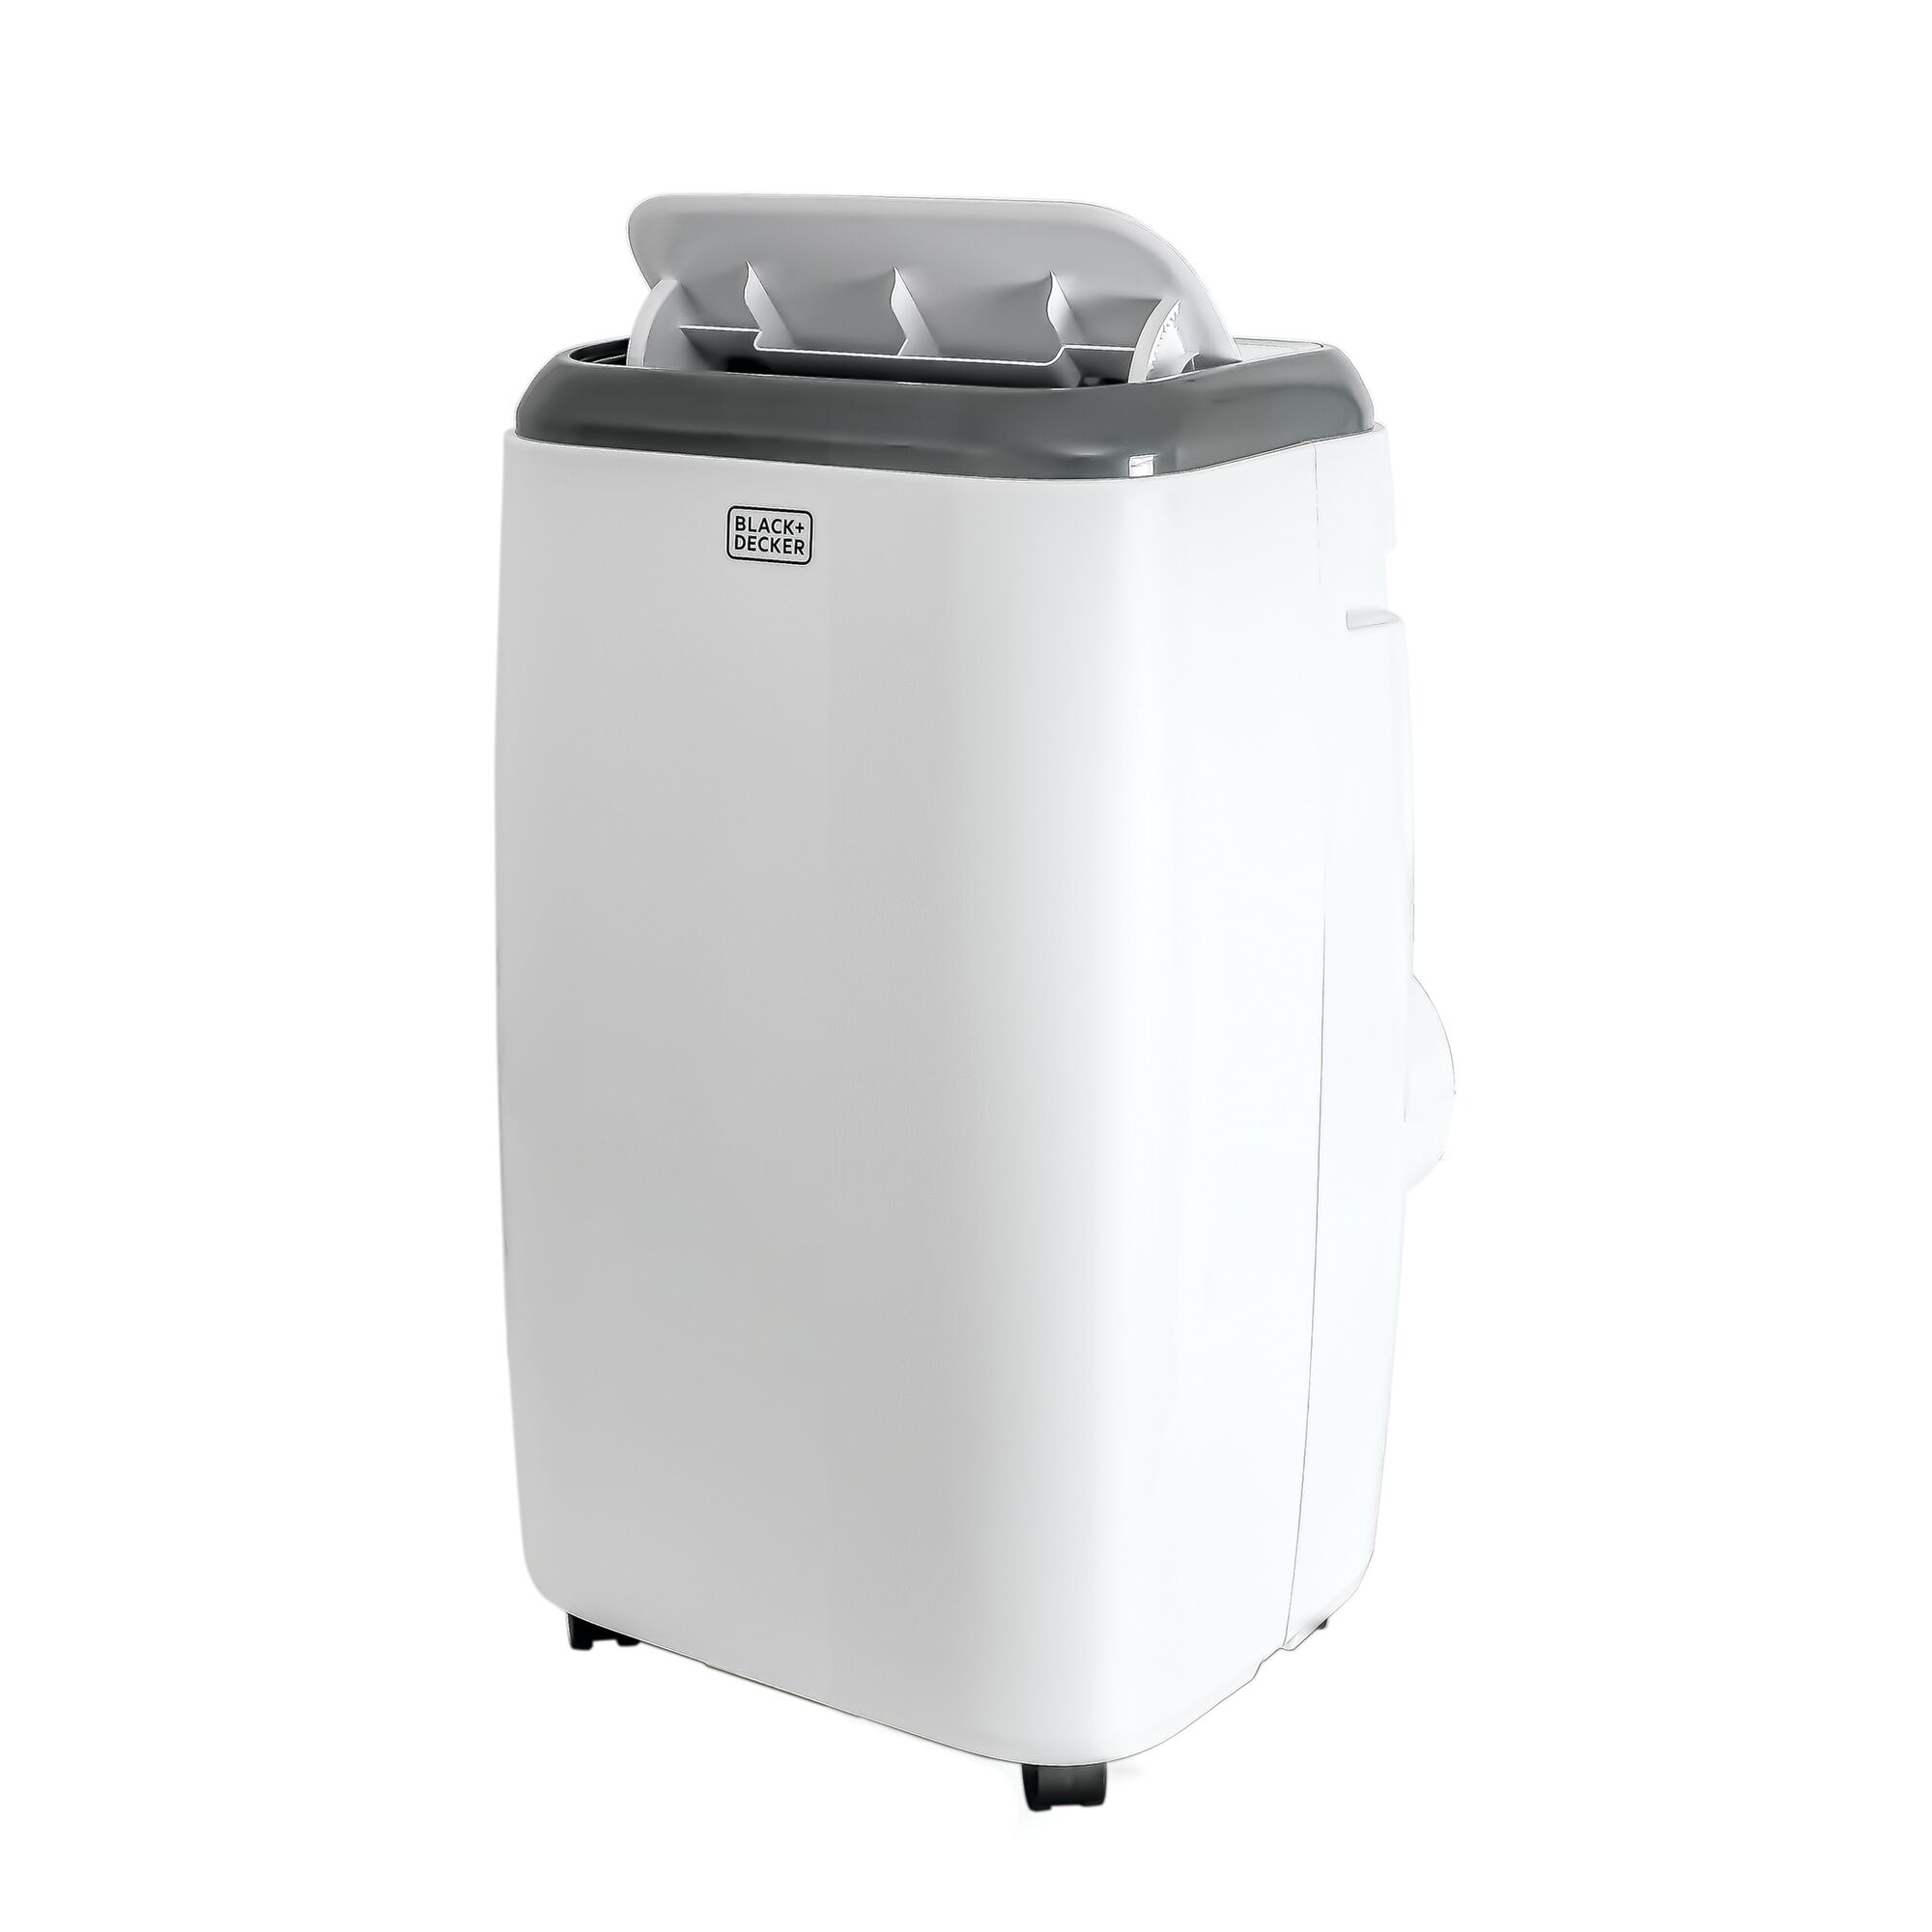 Portable Air Conditioner on white background.